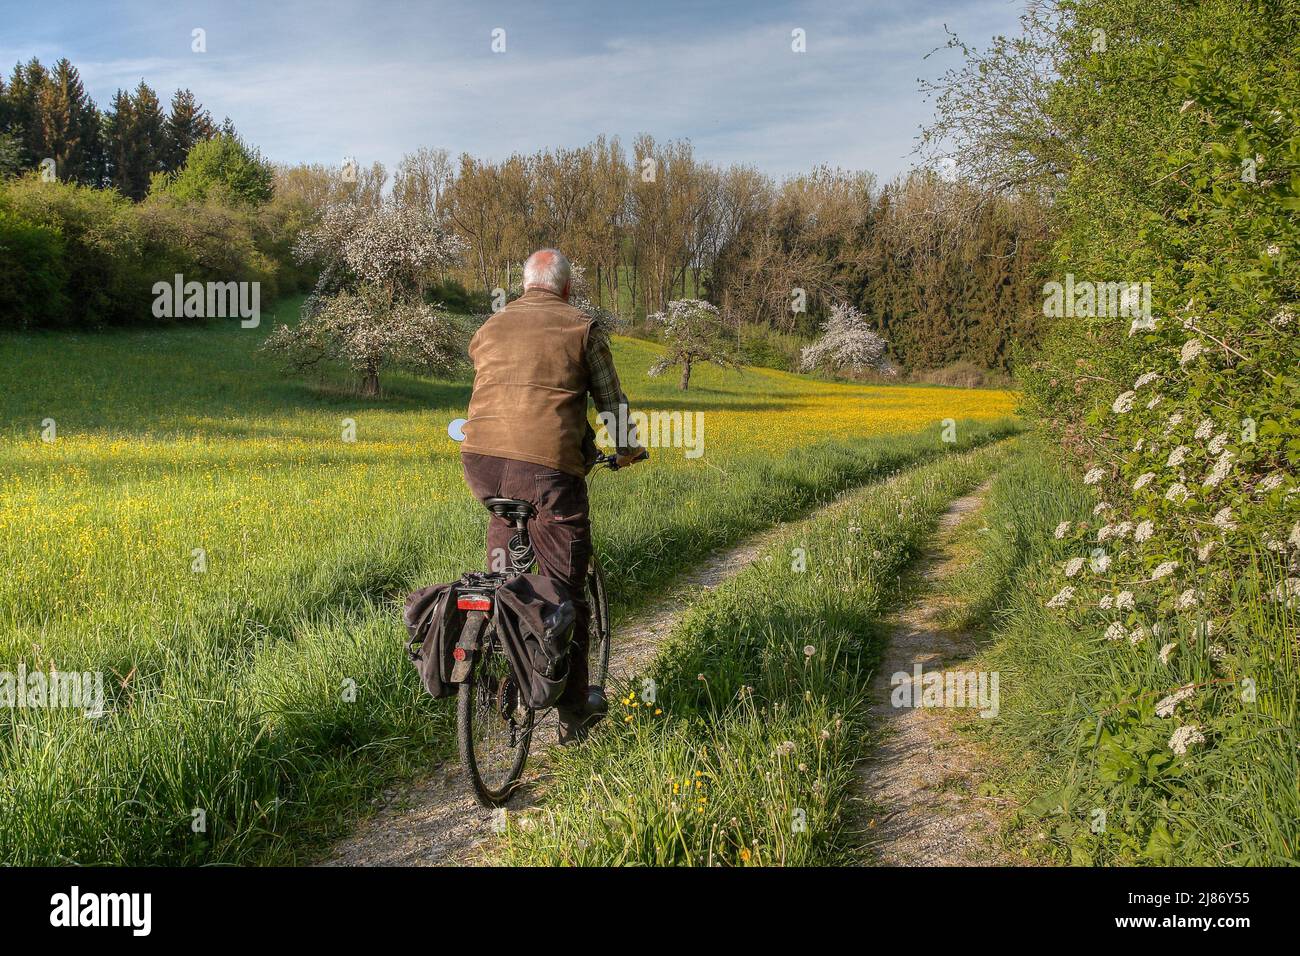 An elderly man rides his bike off-road on a dirt road through a beautiful flowering meadow valley. Stock Photo